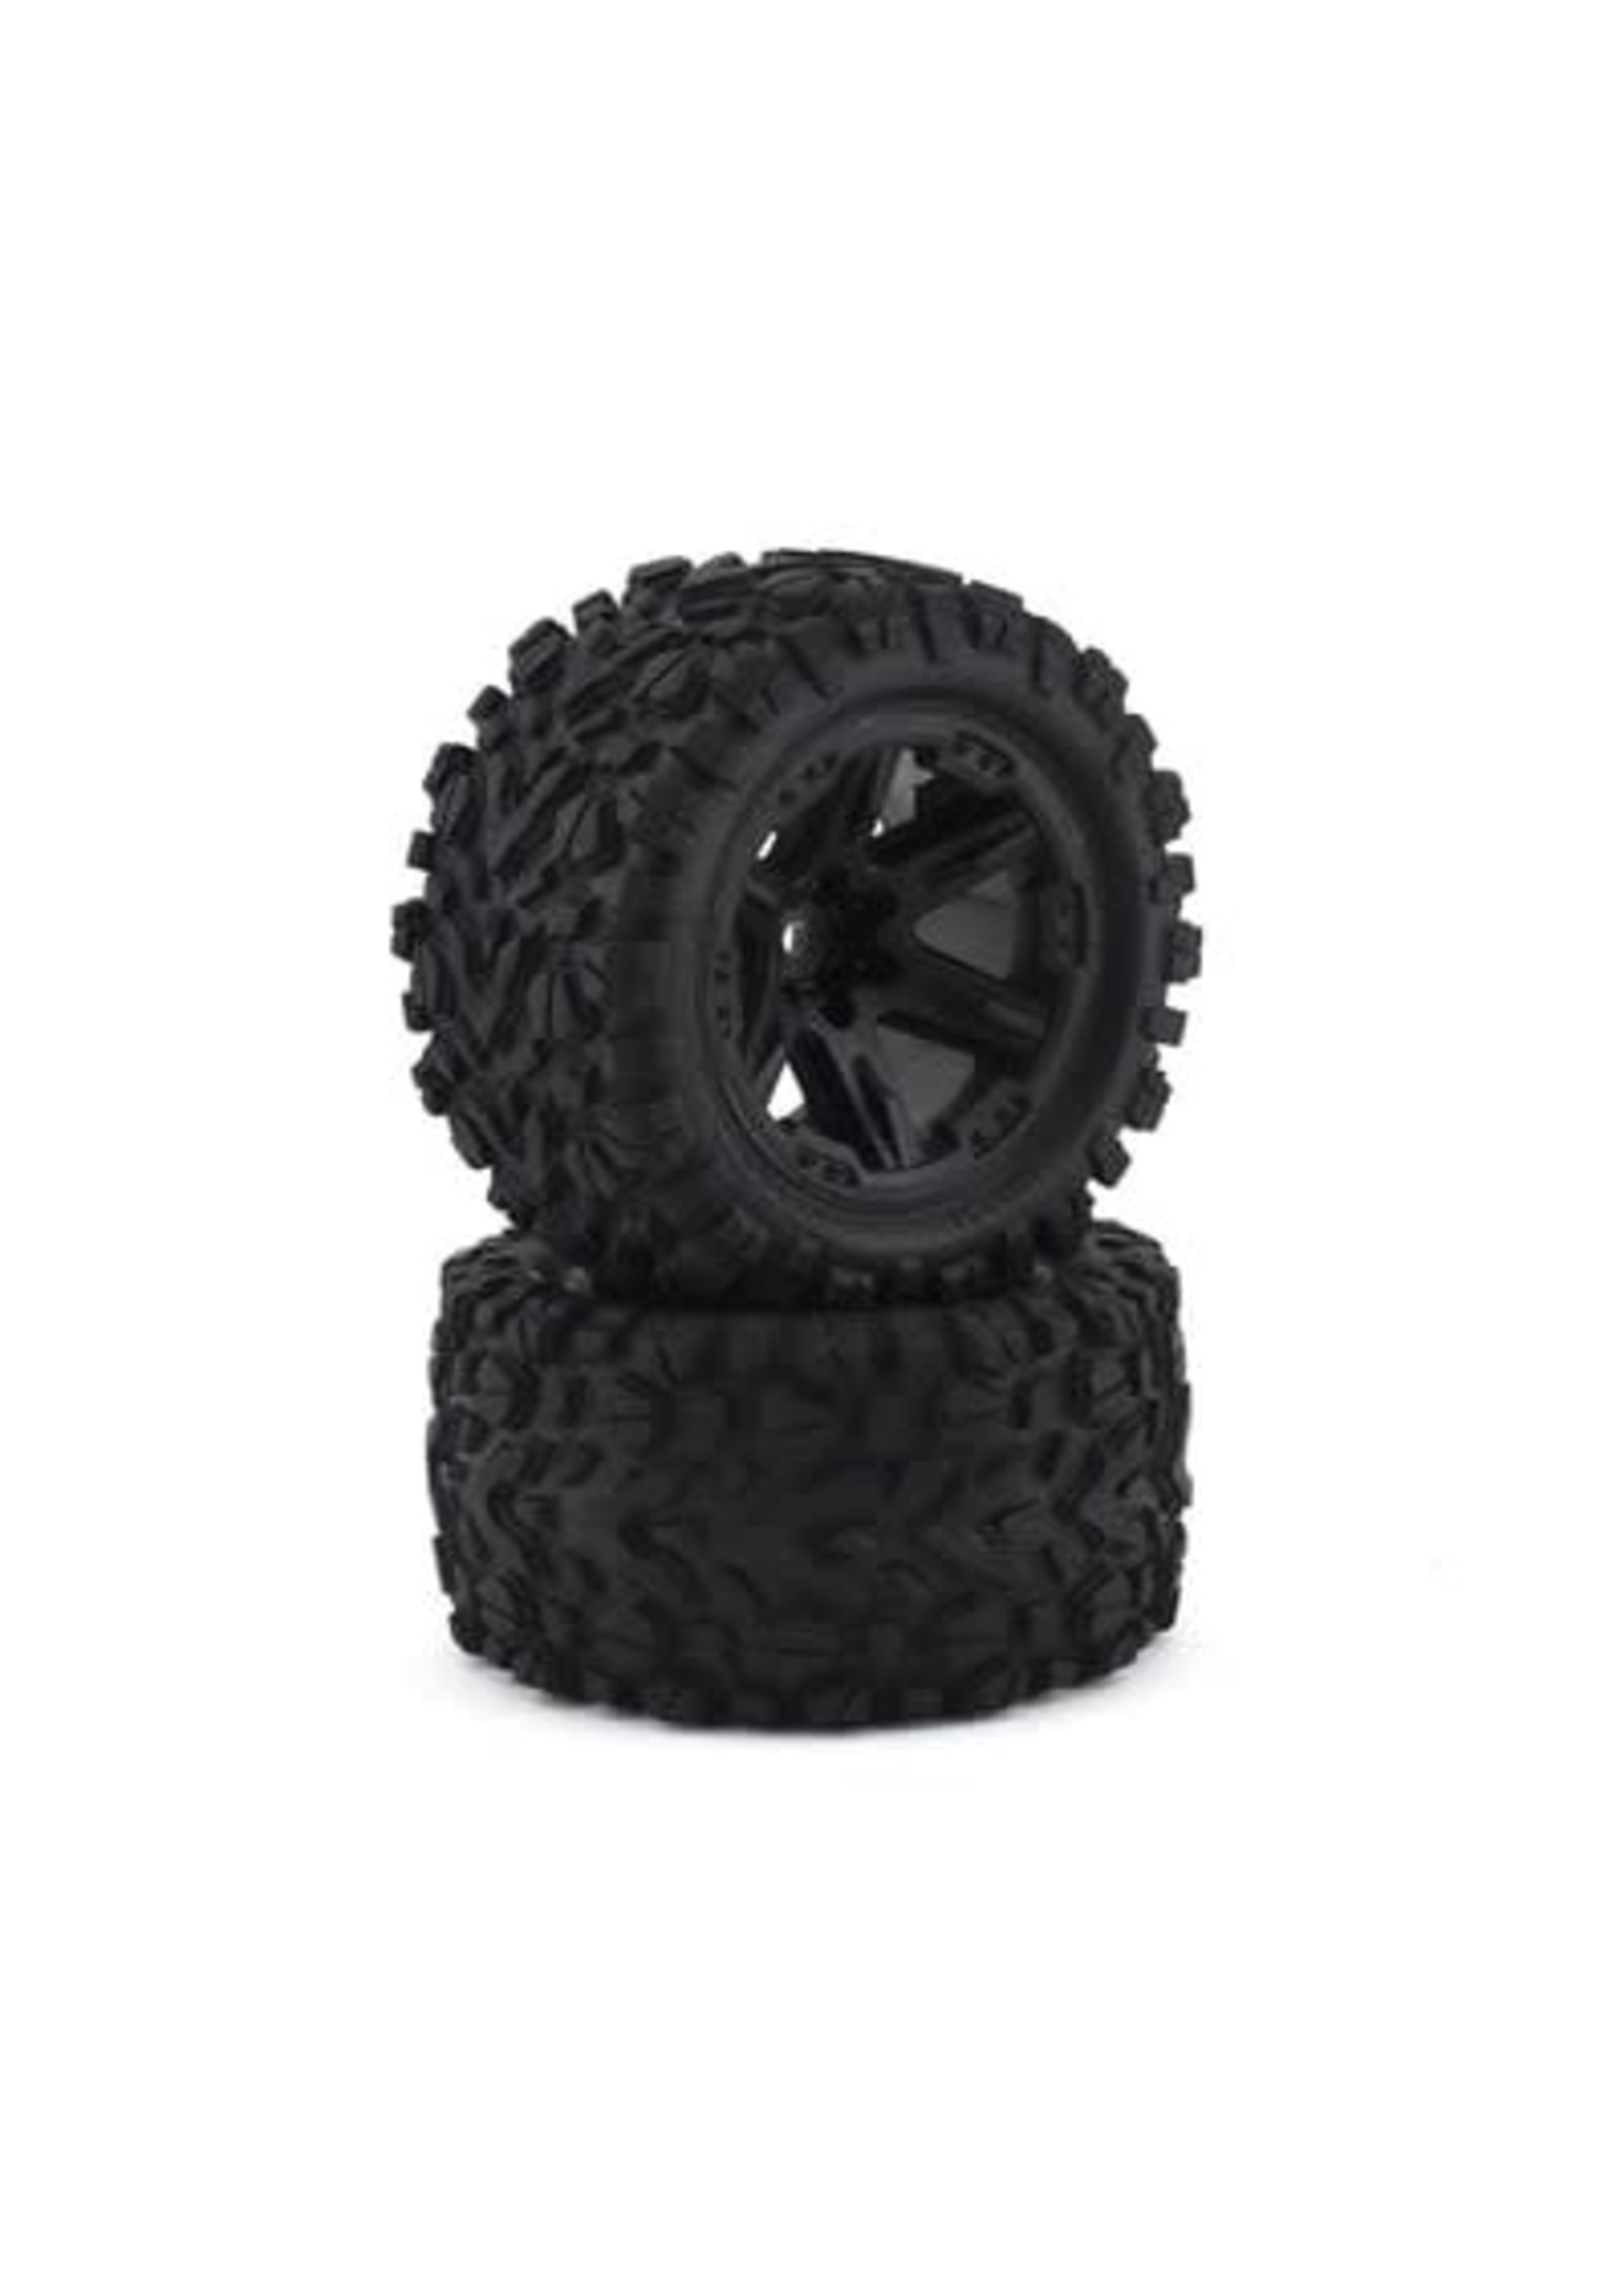 Traxxas 6773 Tires & wheels, assembled, glued (2.8') (RXT black wheels, Talon Extreme tires, foam inserts) (4WD electric front/rear, 2WD electric front only) (2) (TSM rated)